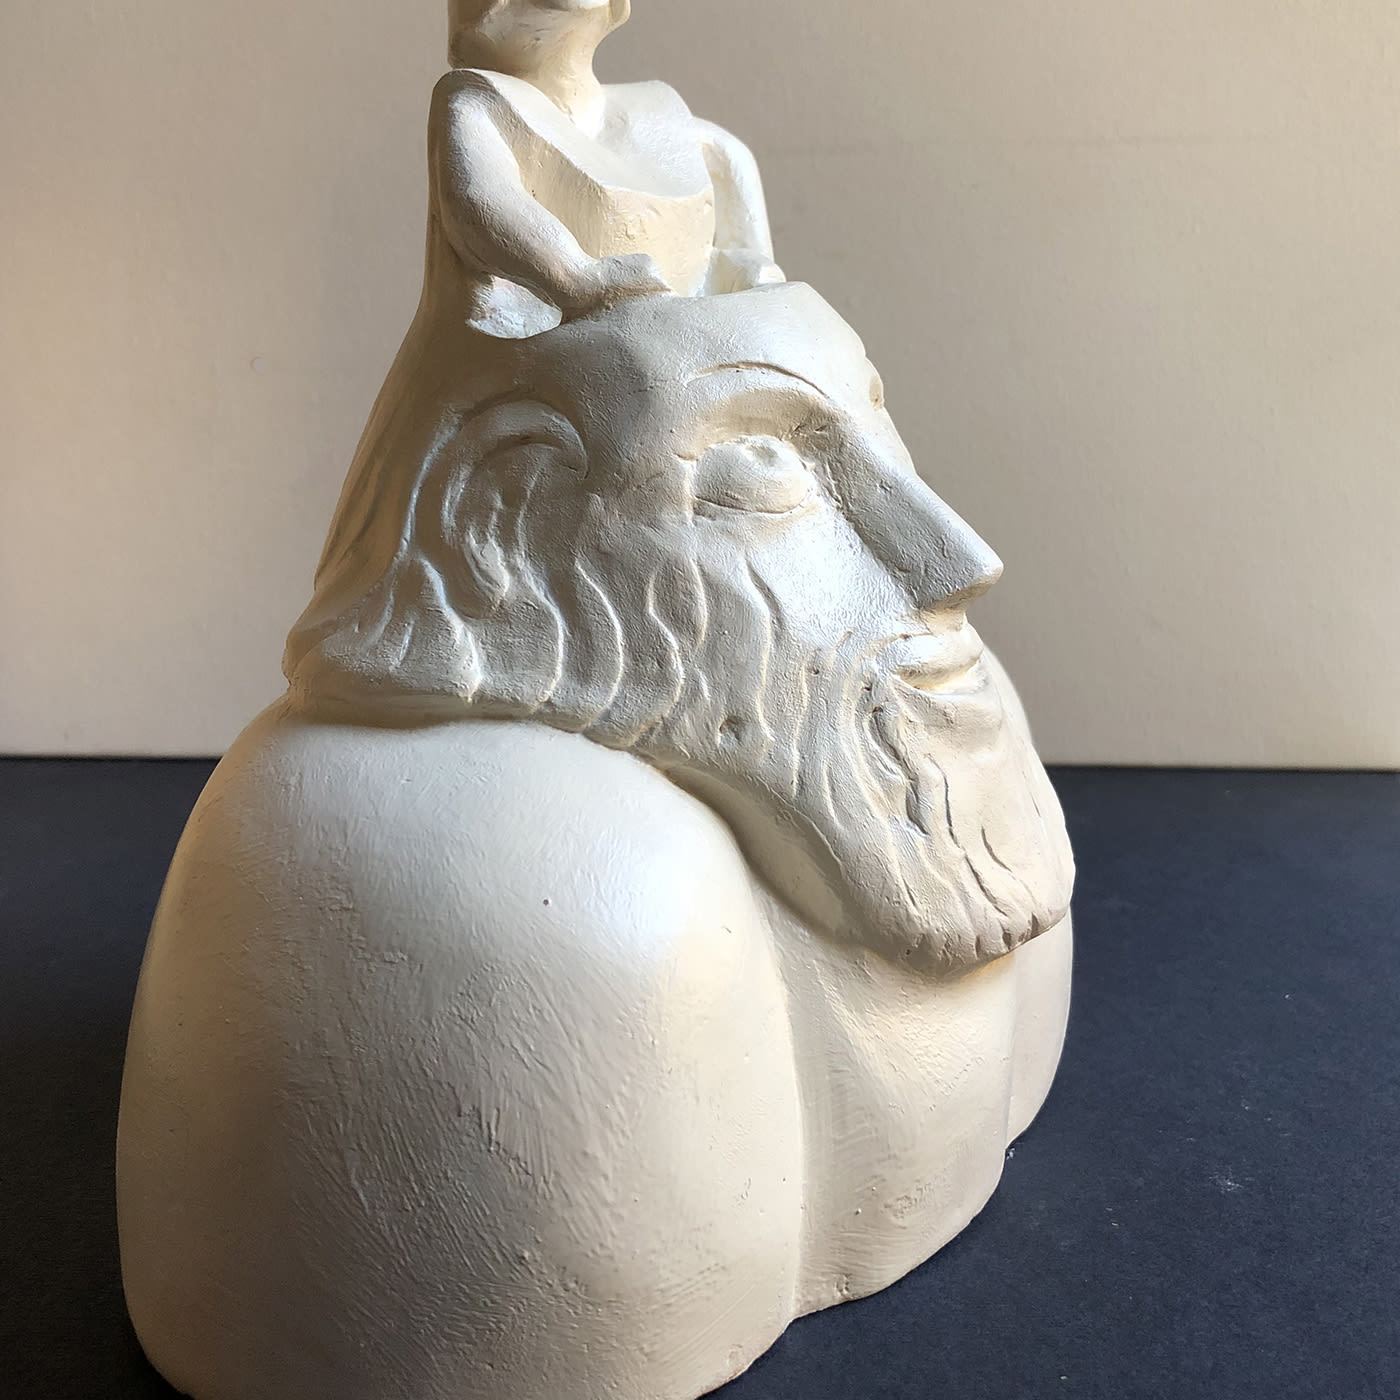 The birth of Athena from the head of Zeus Sculpture - Daniele Nannini